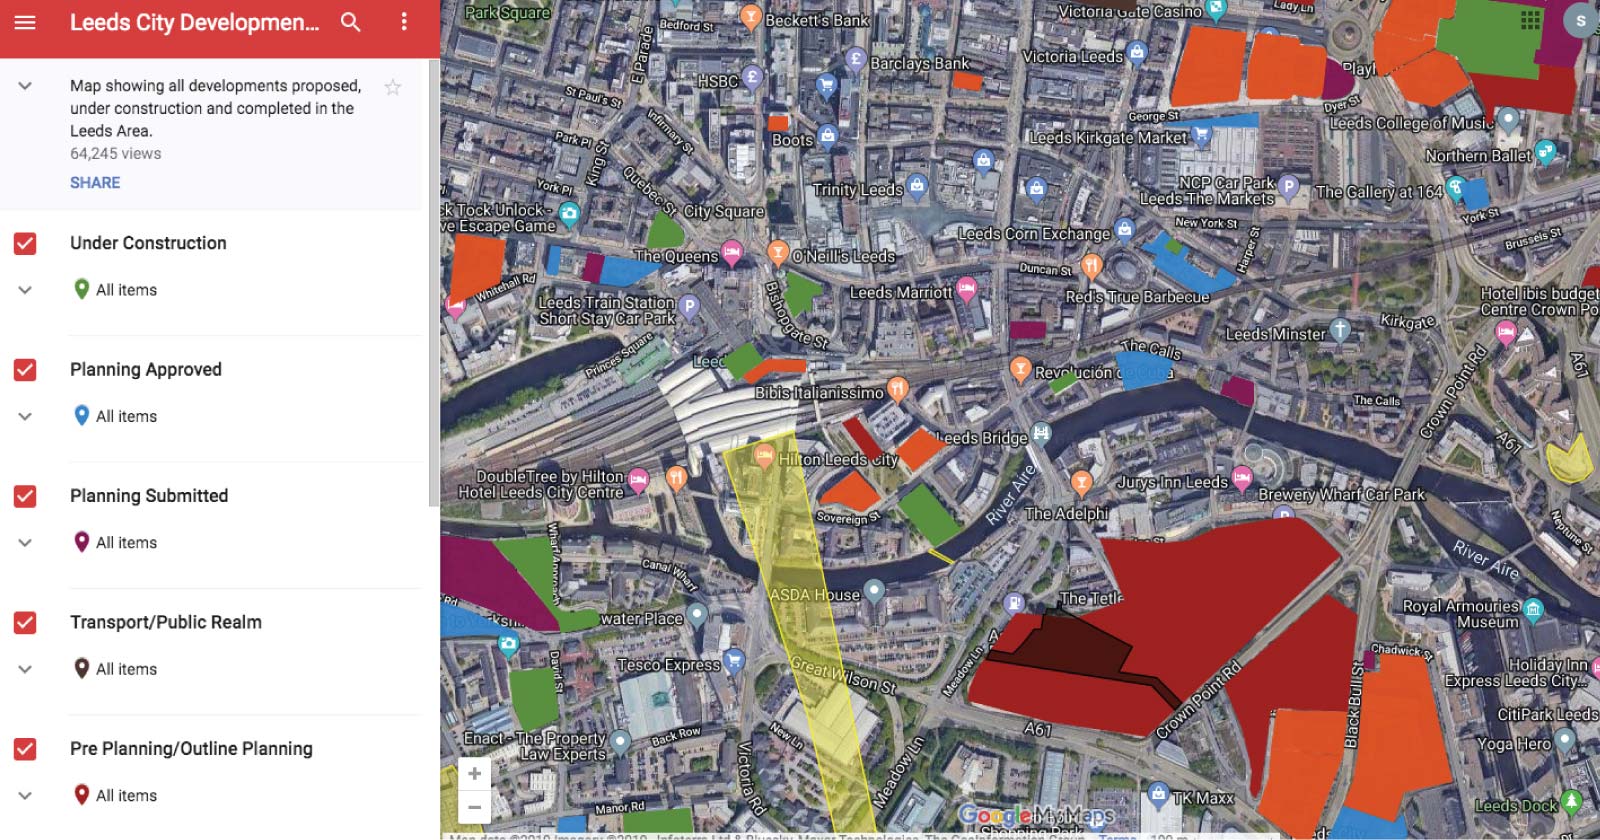 6 Brands That Will Inspire You to Create Better Content - Leeds city development map